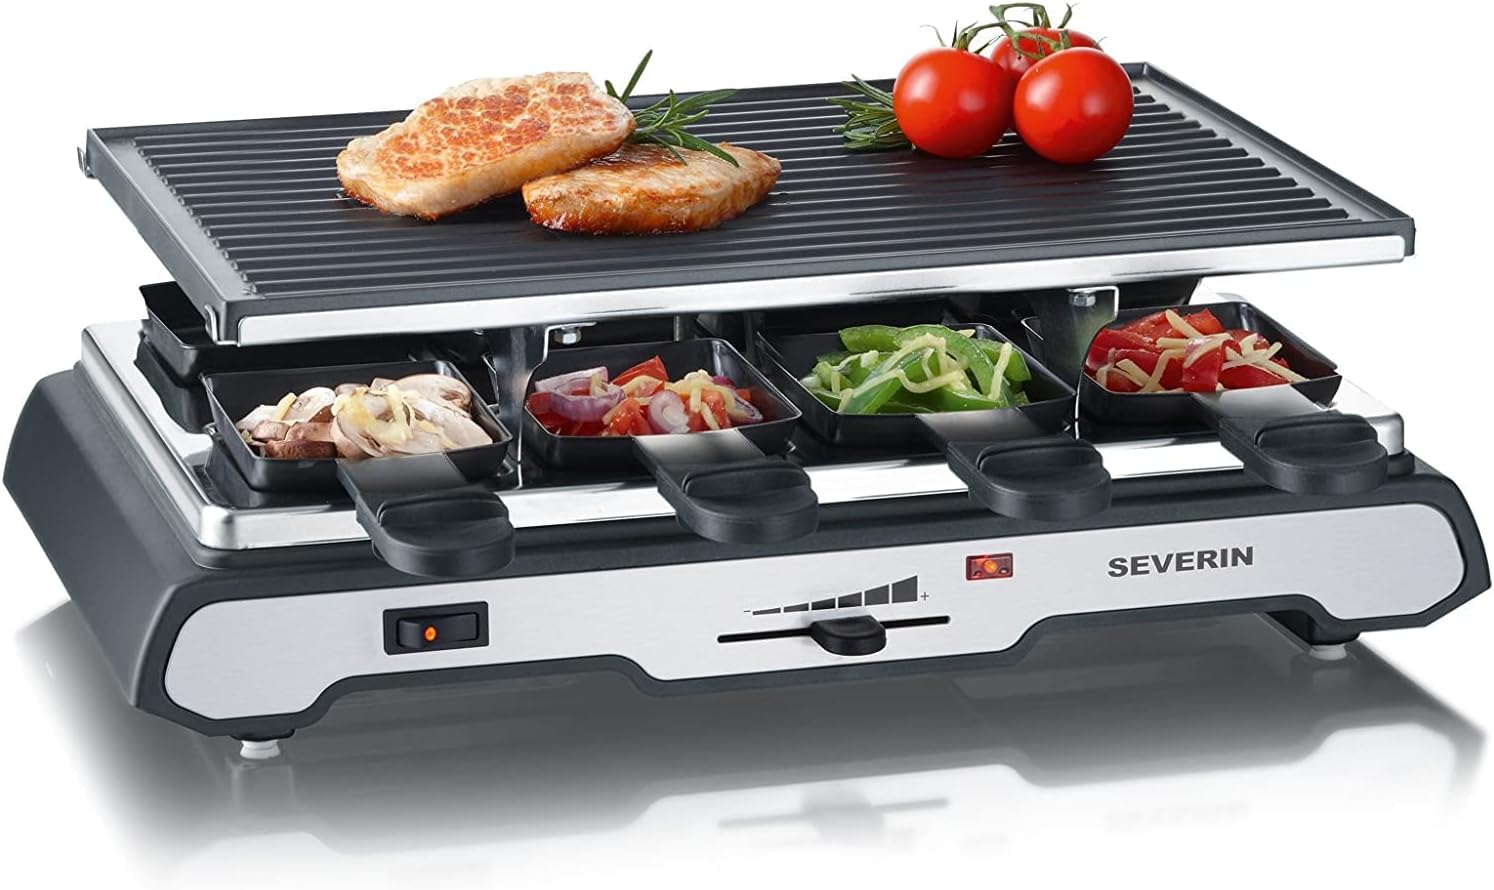 Severin RG 2685 Raclette grill 8 pans